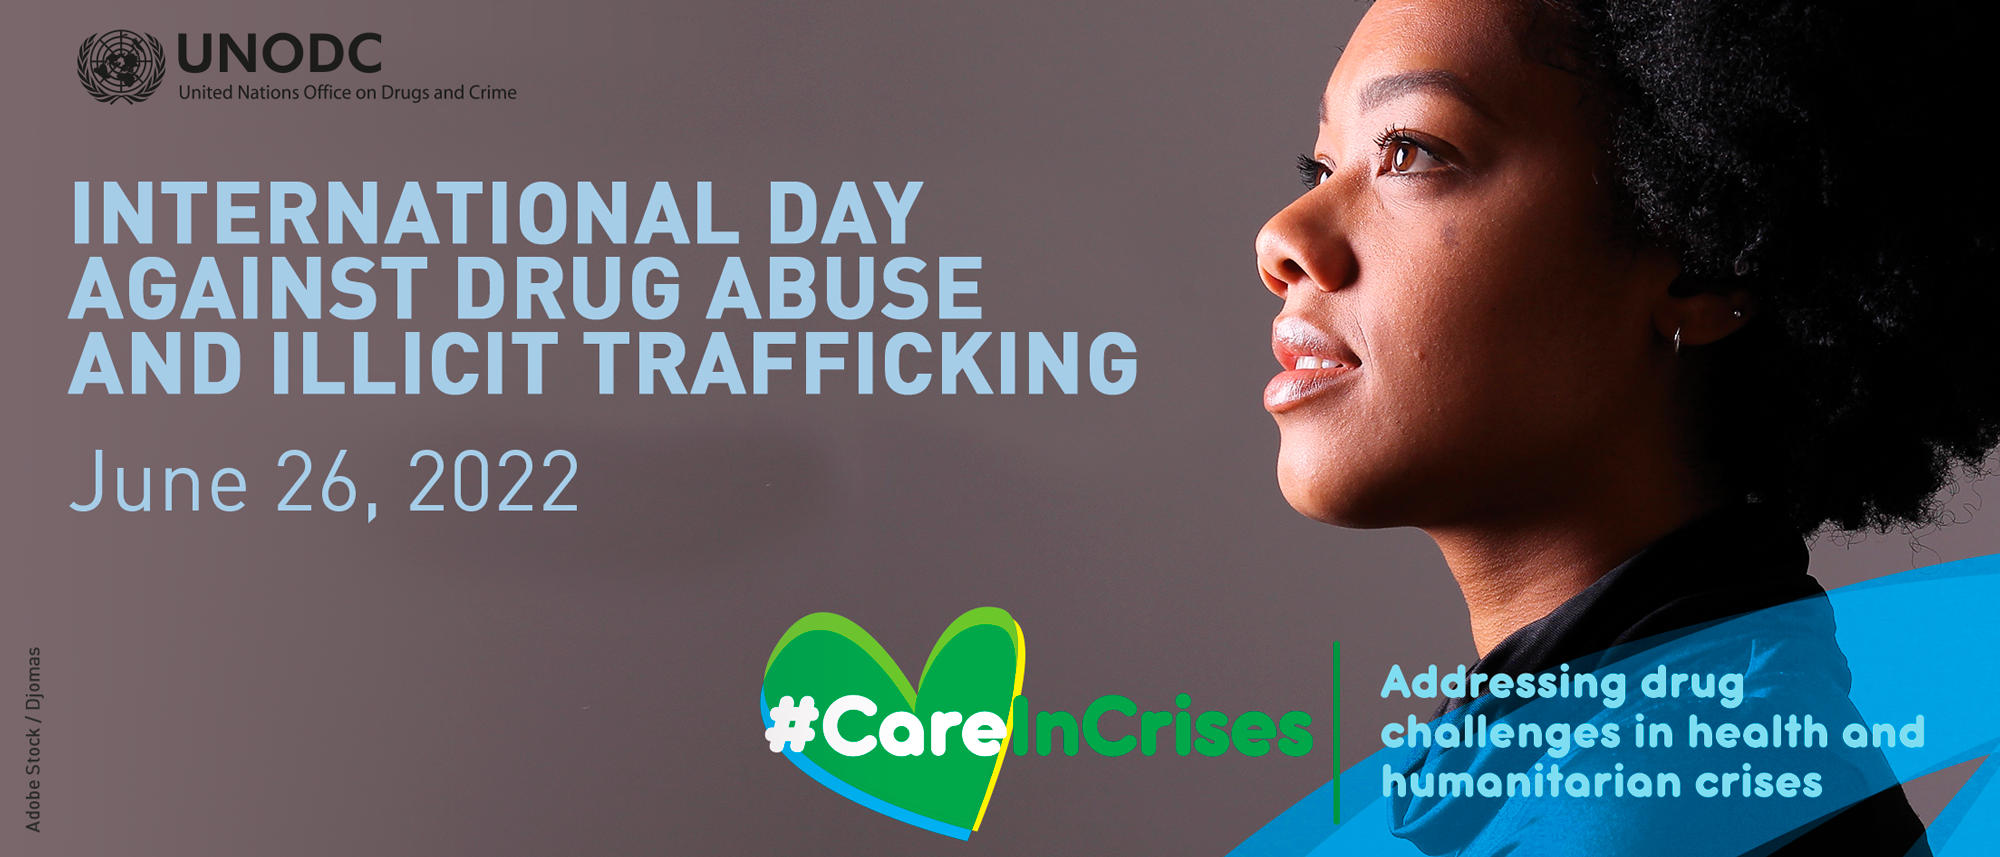 International Day against Drug Abuse and Illicit Trafficking 2022_40.1